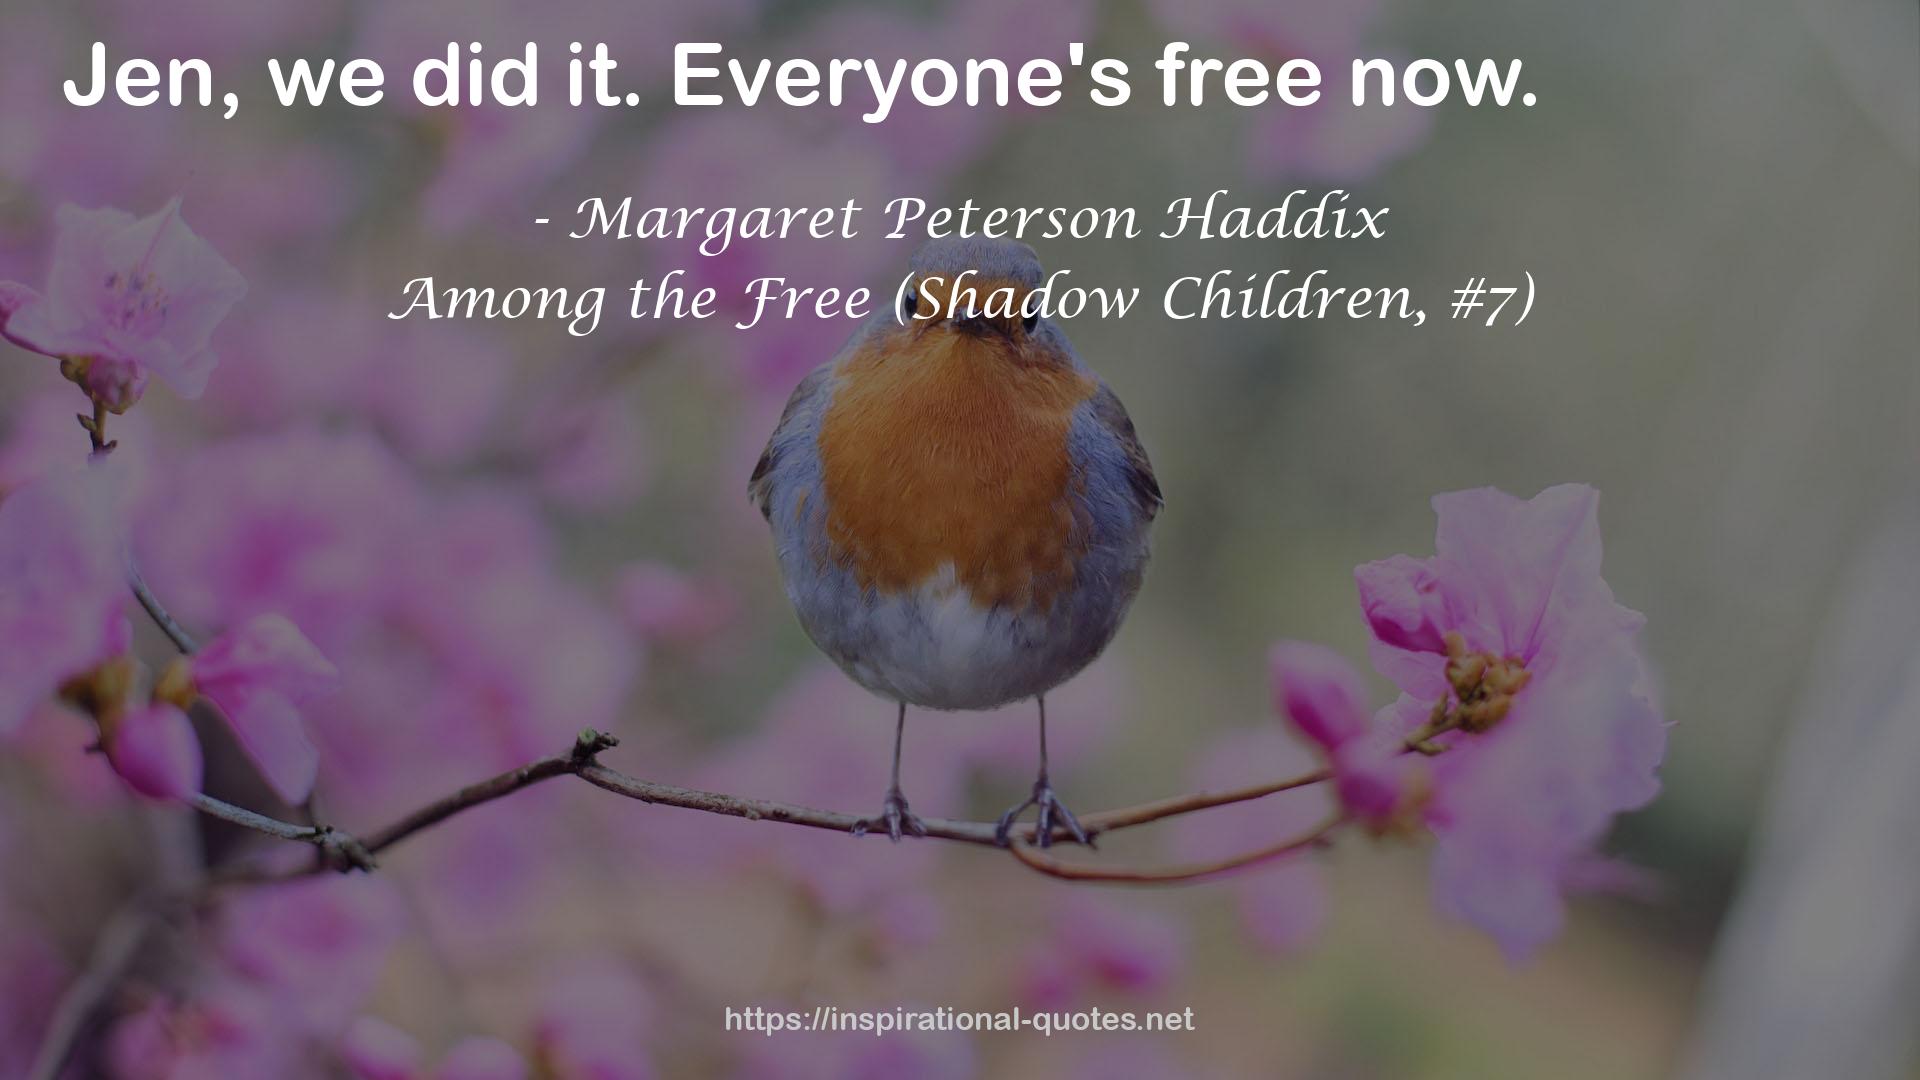 Among the Free (Shadow Children, #7) QUOTES